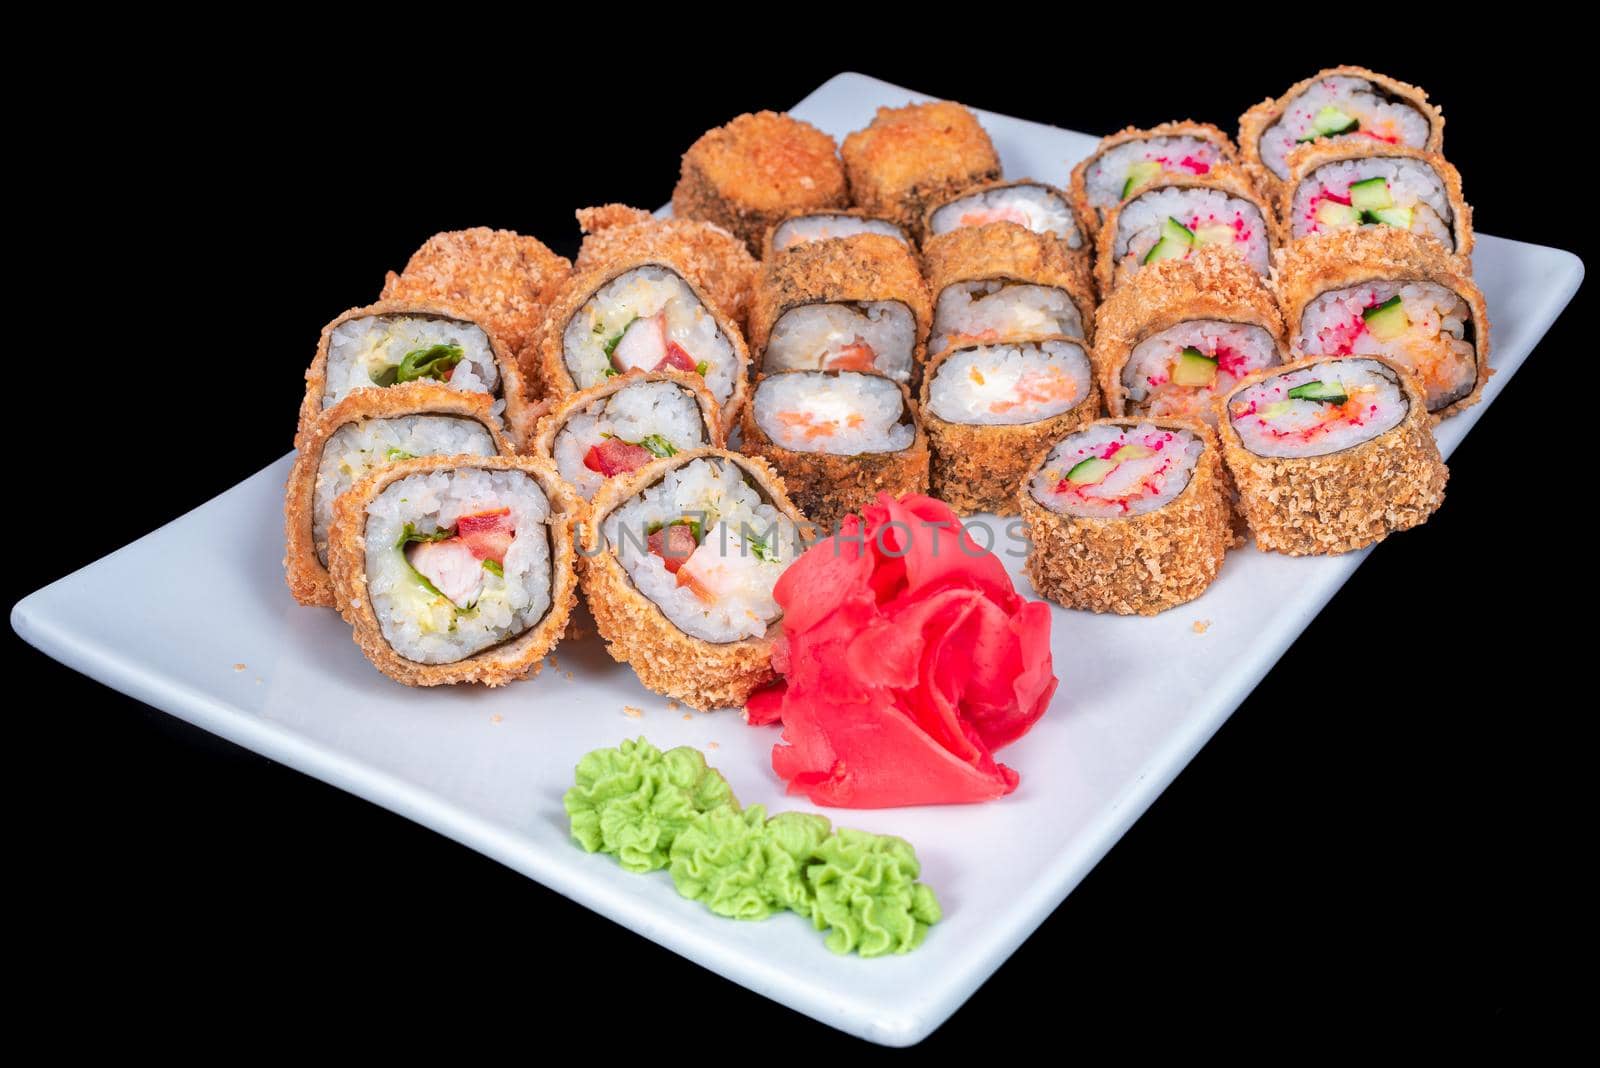 Japanese Cuisine - Sushi Roll with Shrimps and Conger, Avocado, Tobiko and Cheese. sushi rolls tempura,japanese food style ,Traditional Japanese cuisine, Crunchy Shrimp Tempura Roll by Andrii_Ko